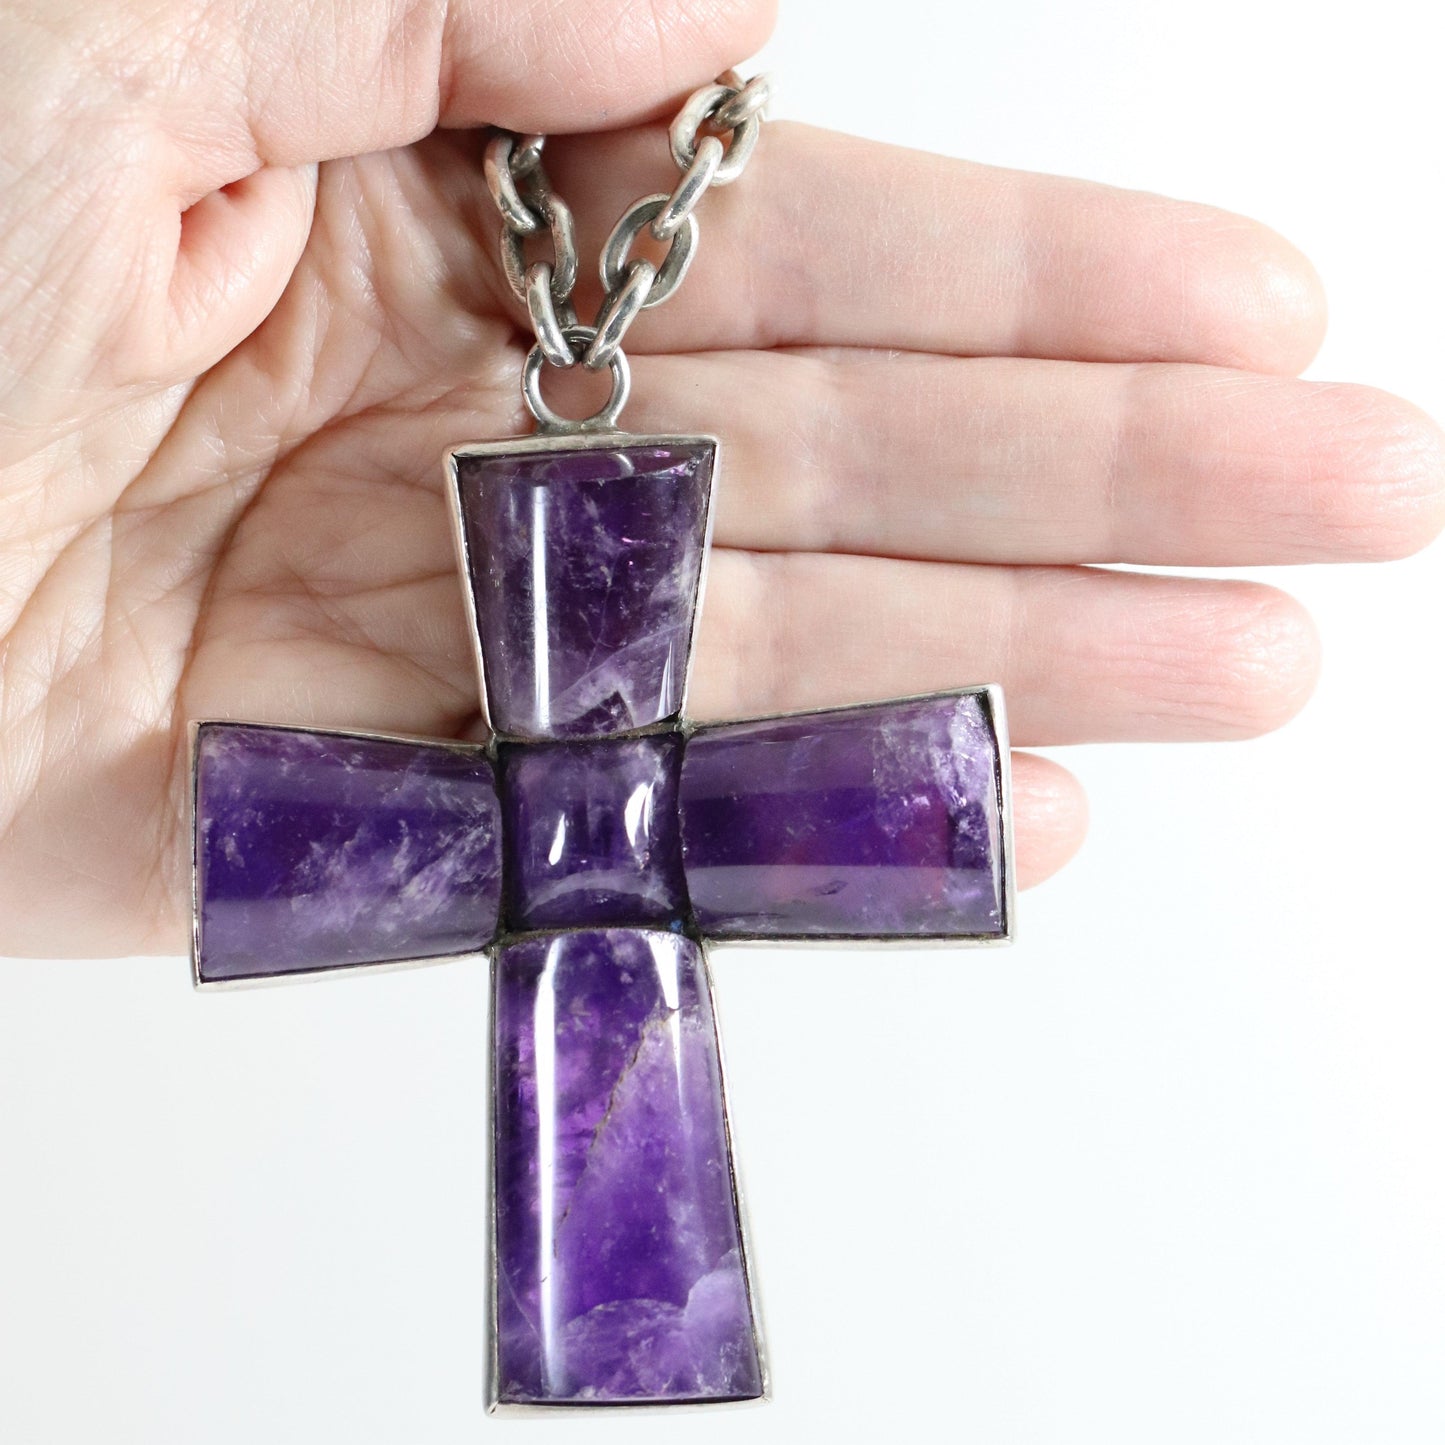 Vintage Taxco William Spratling Jewelry | Amethyst Cross with Handcrafted Chain - Carmel Fine Silver Jewelry